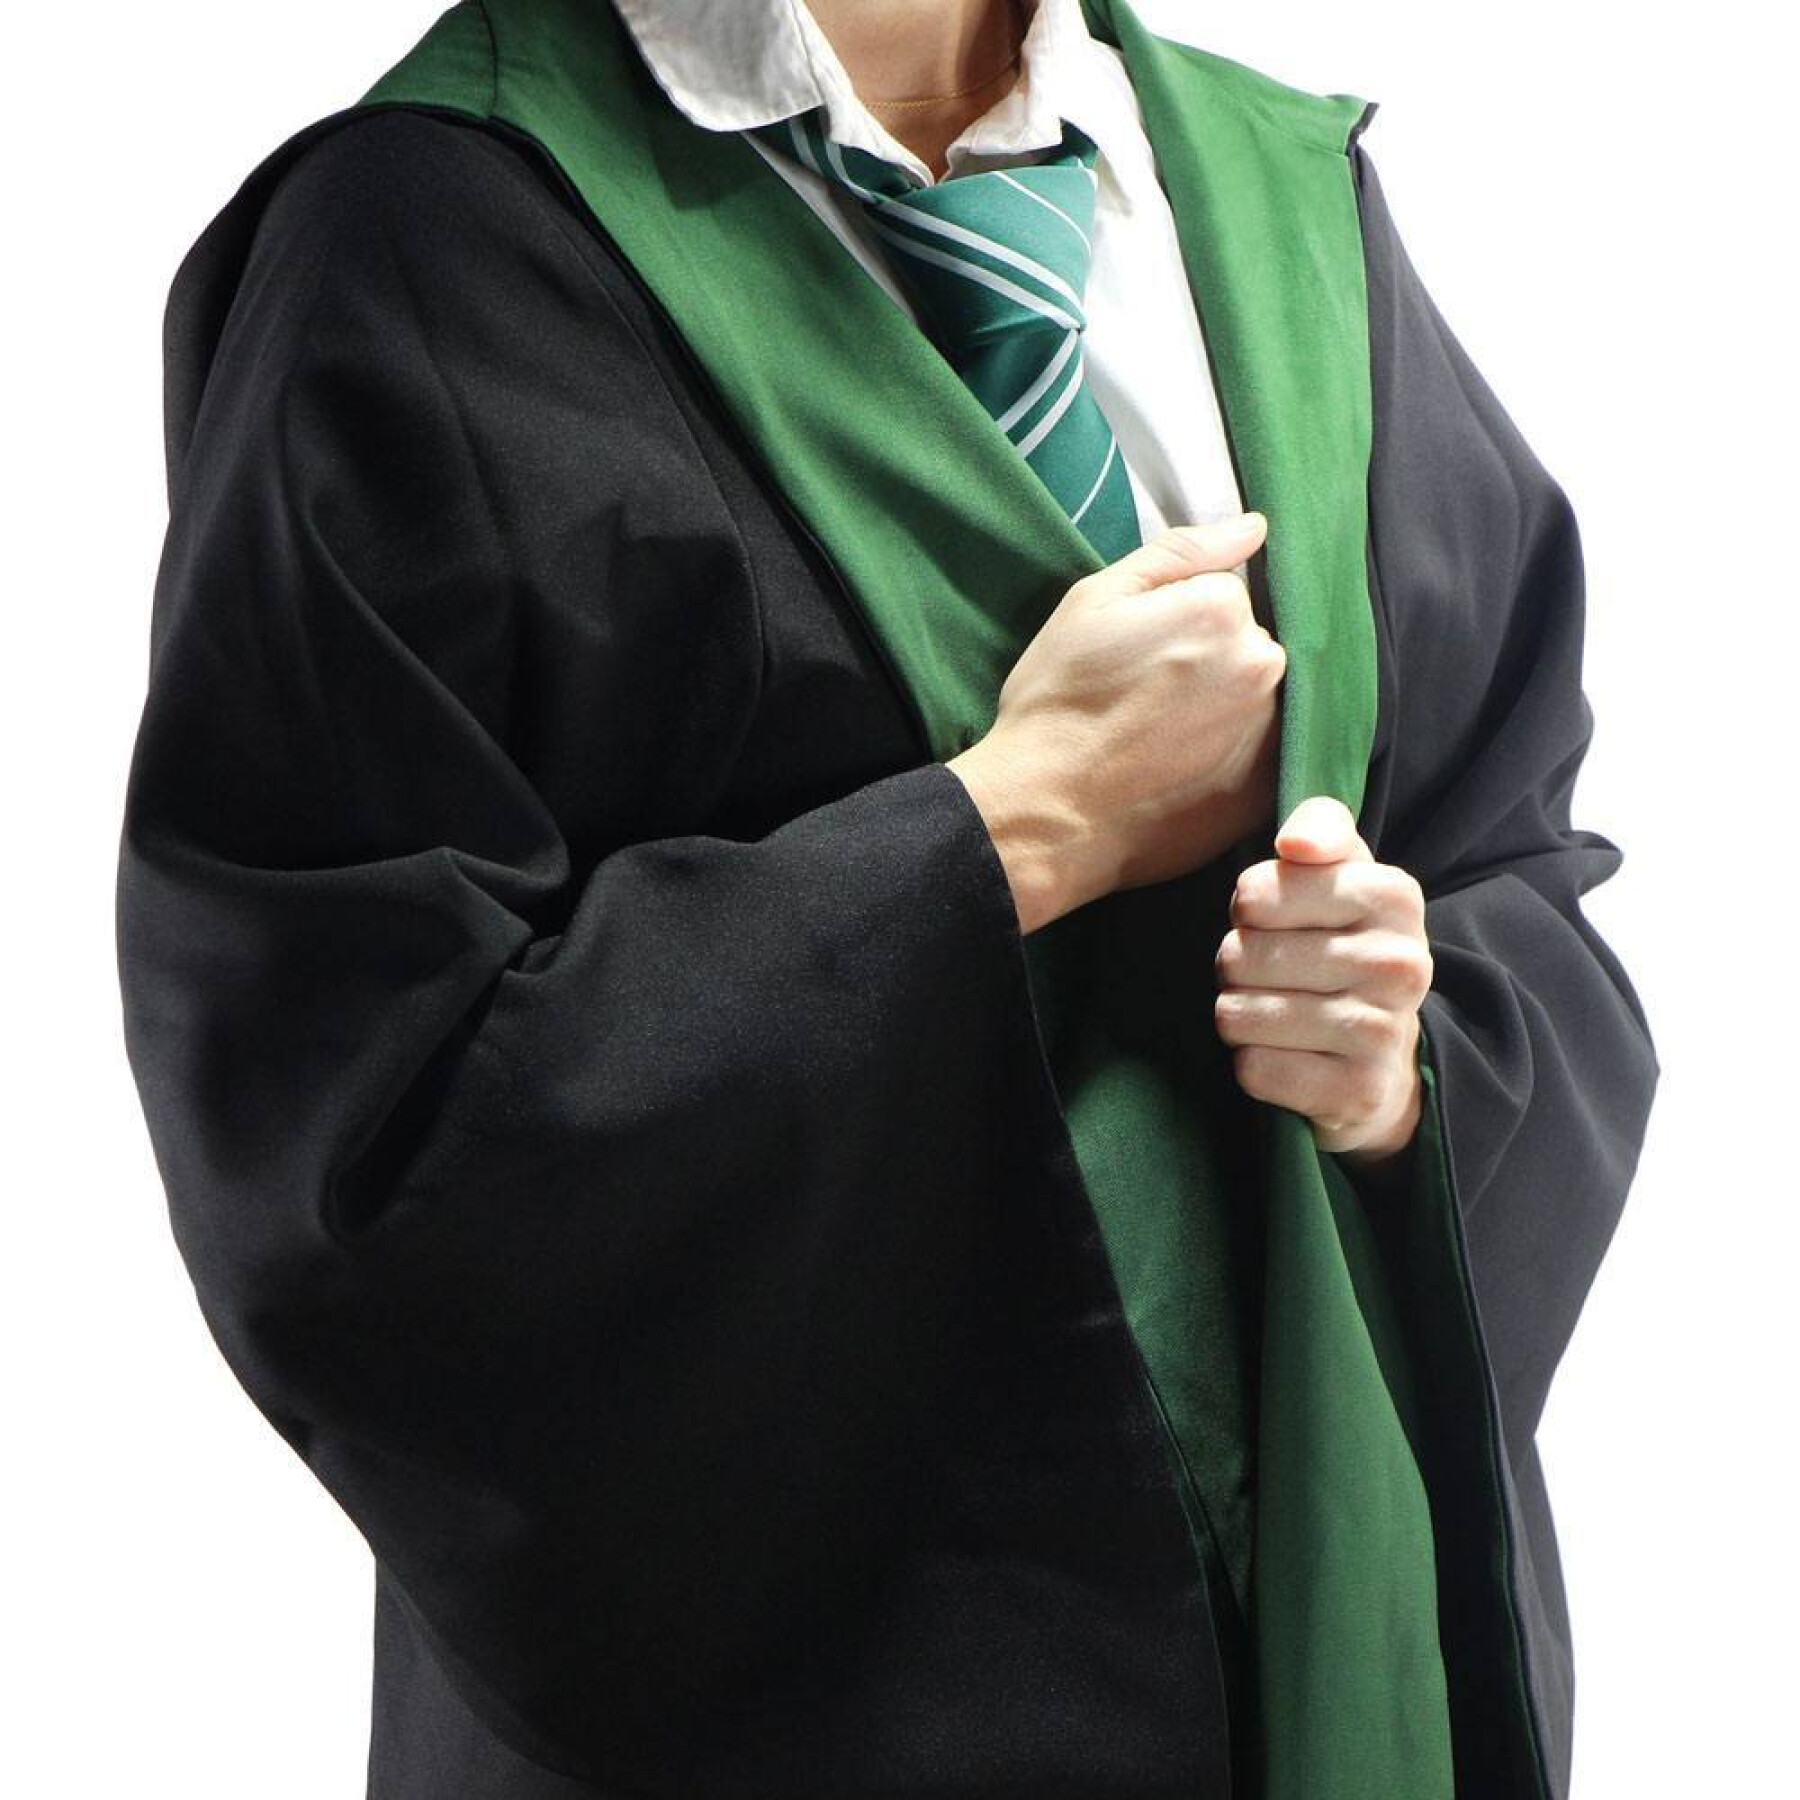 Witch dress disguise Cinereplicas Harry Potter Slytherin